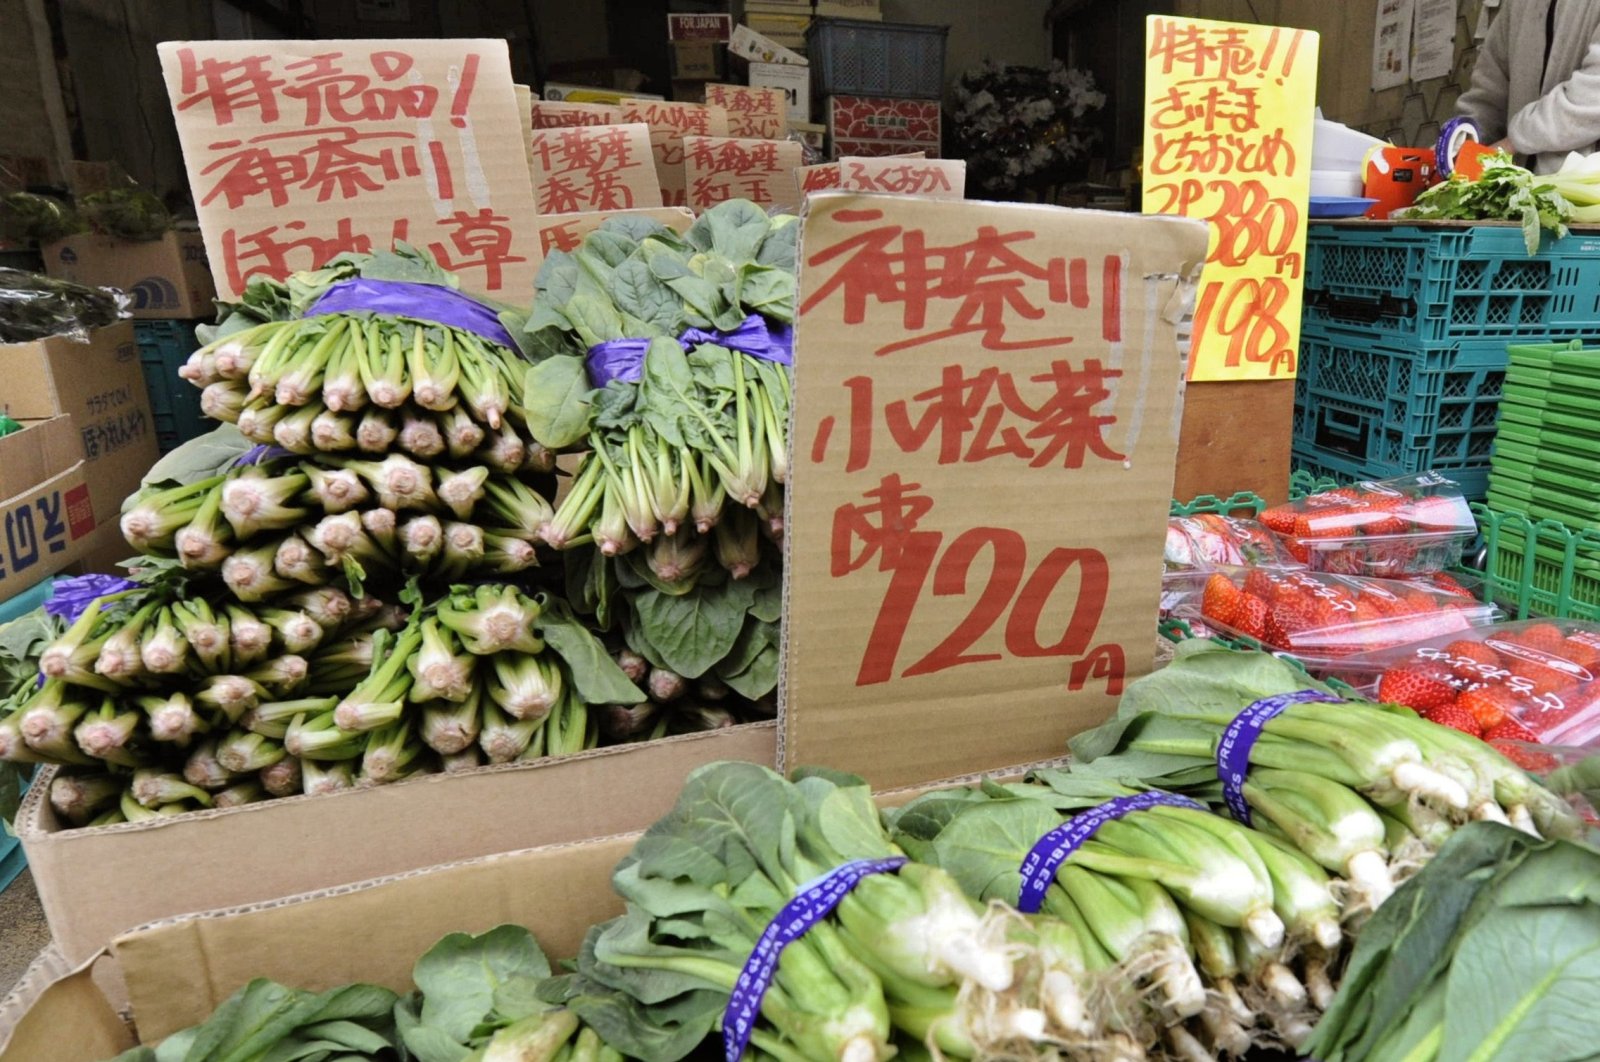 Spinach from Kanagawa Prefecture, left rear, and other leaf vegetables are on sale at a greengrocery in Tokyo, Japan, March 23, 2011. (Kyodo News via AP)